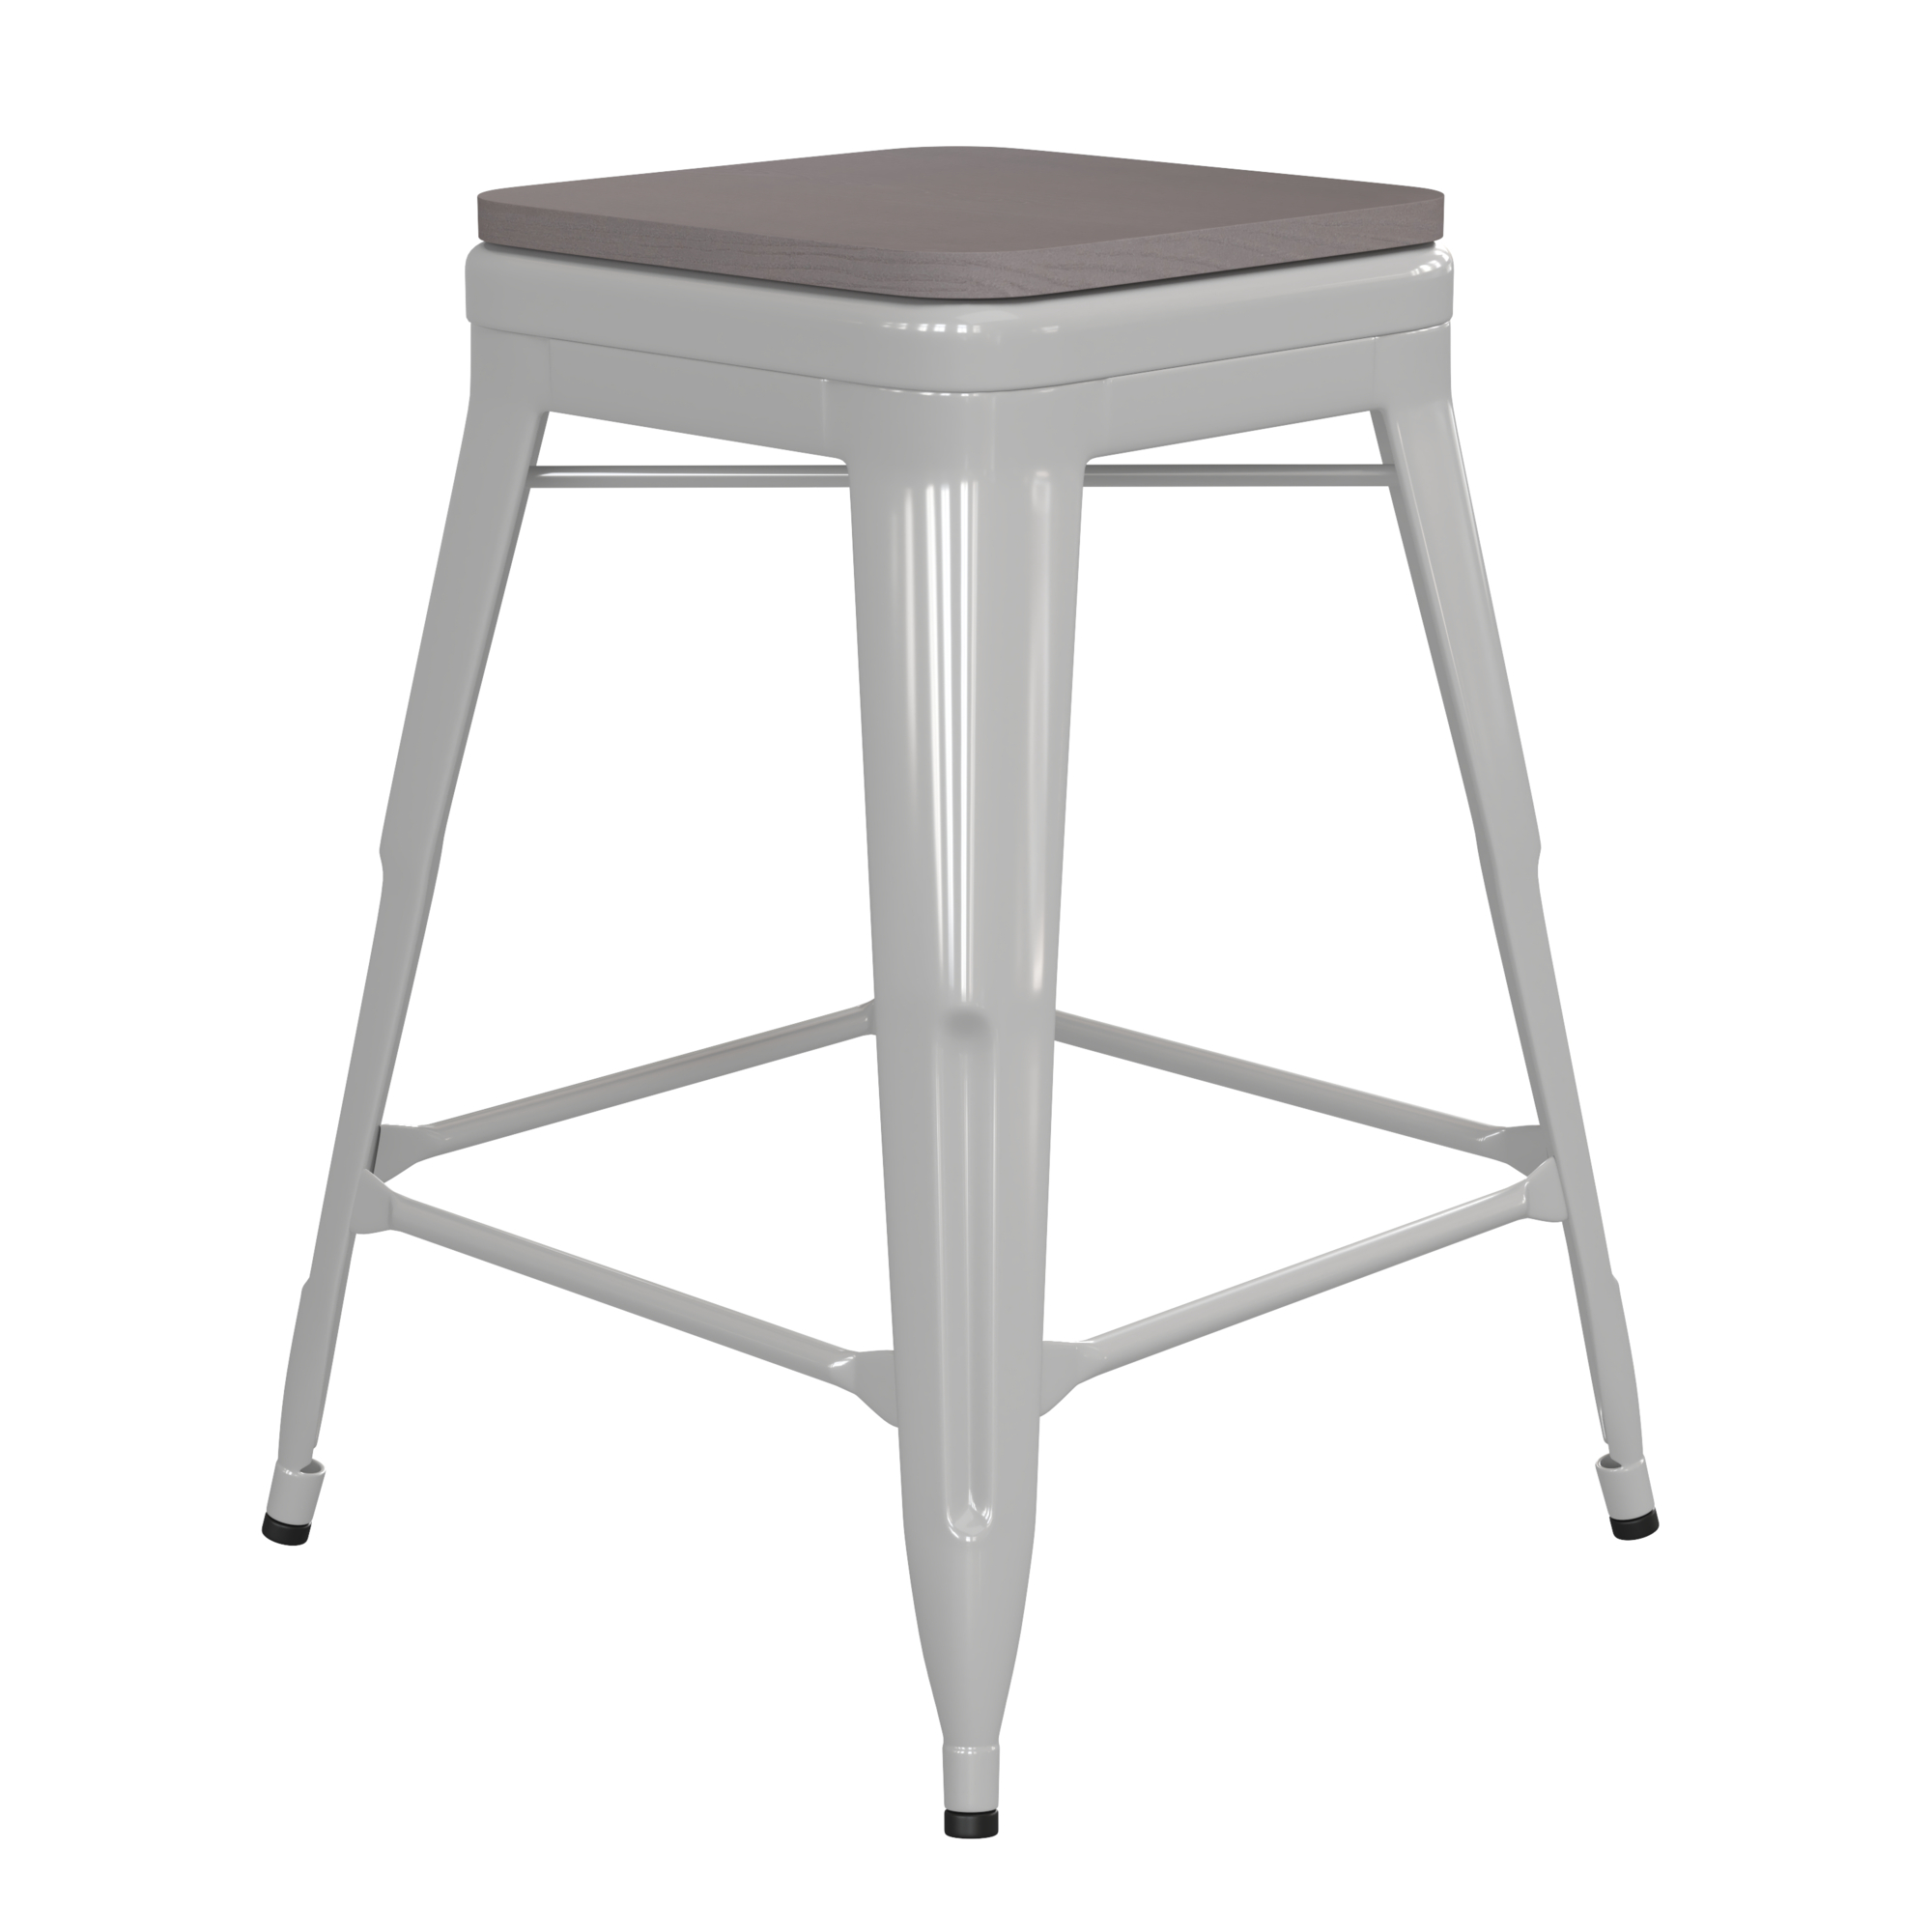 Flash Furniture, 24Inch White Metal Stool-Gray Poly Seat, Primary Color White, Included (qty.) 1, Model CH3132024WHPL2G